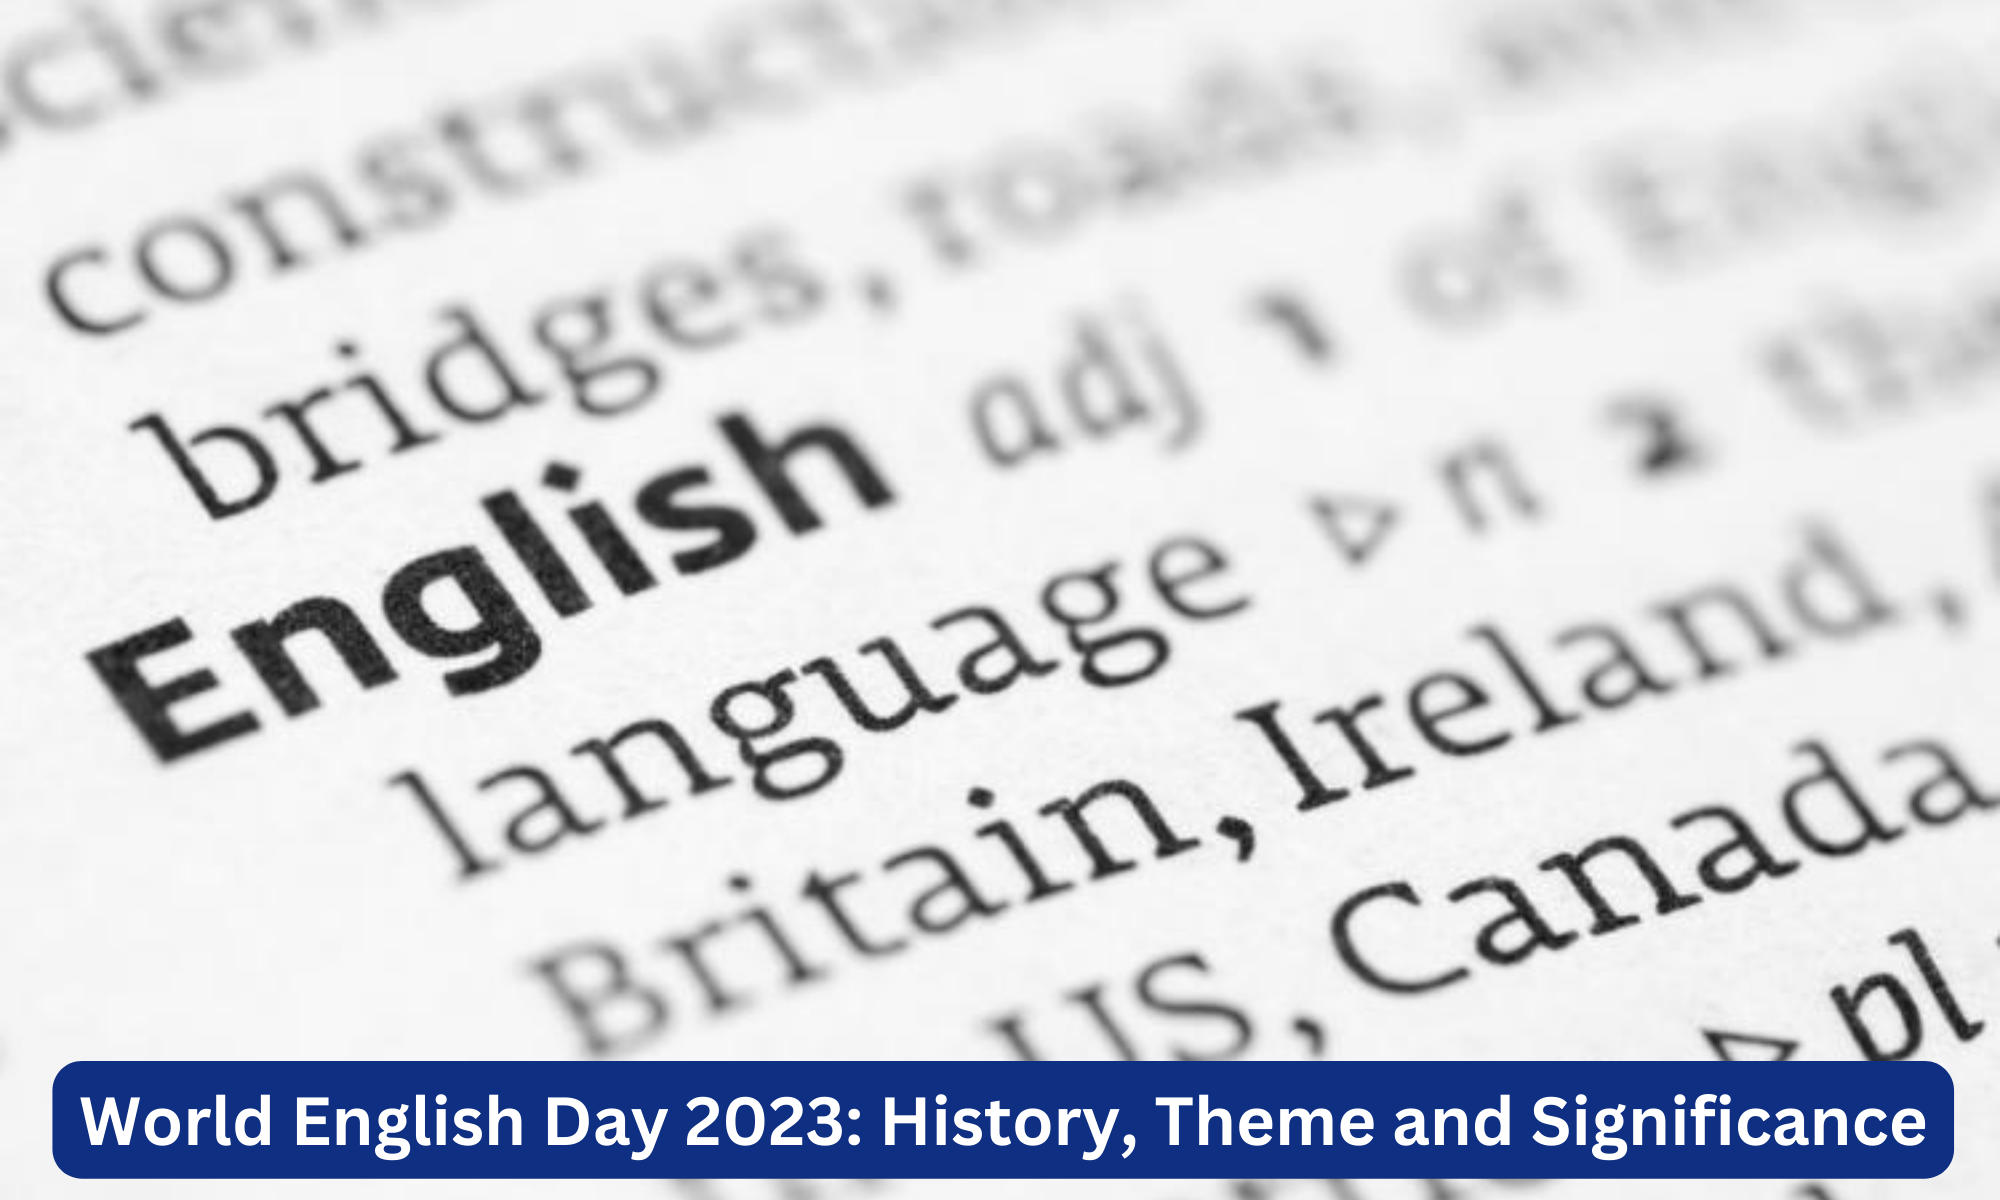 World English Day 2023: History, Theme and Significance